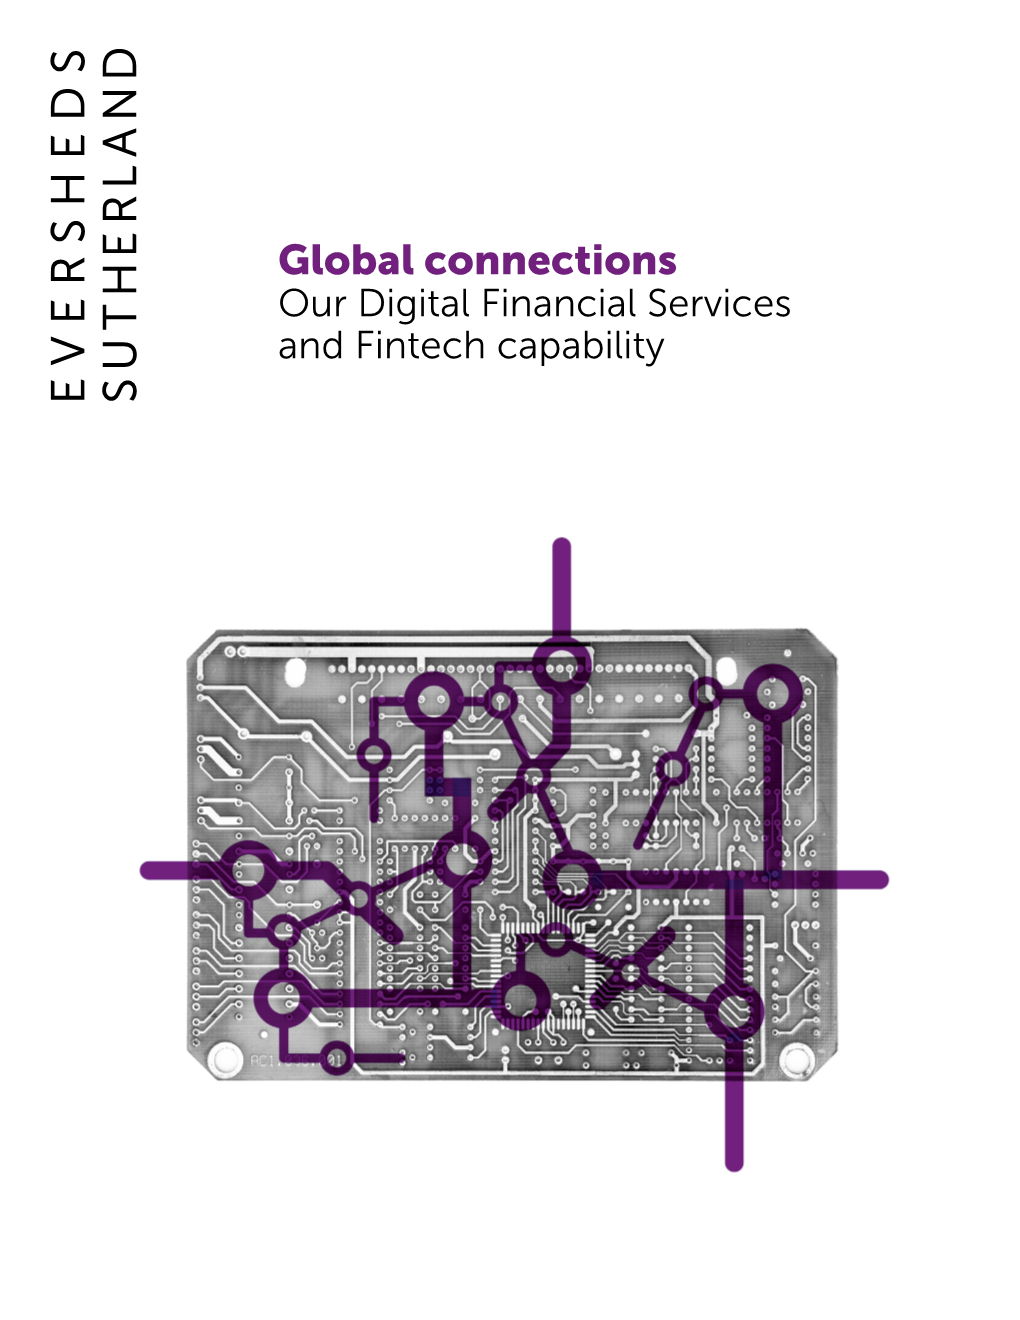 Global Connections Our Digital Financial Services and Fintech Capability Global Digital Financial Services and Fintech